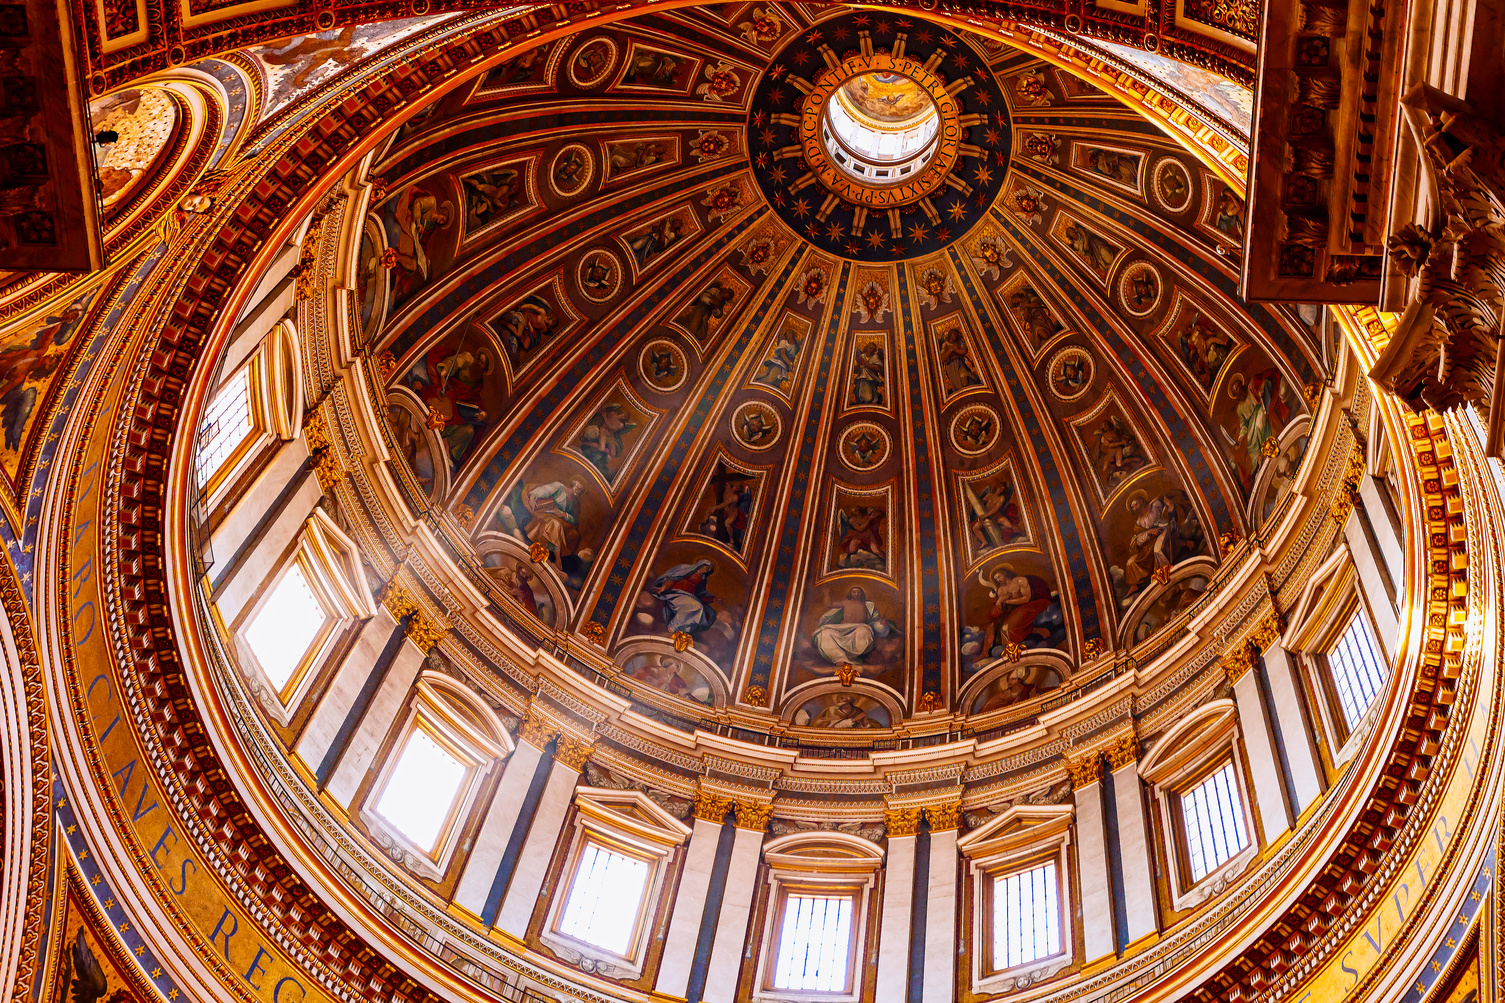 Dome Ceiling of St Peter's Baldachin Basilica